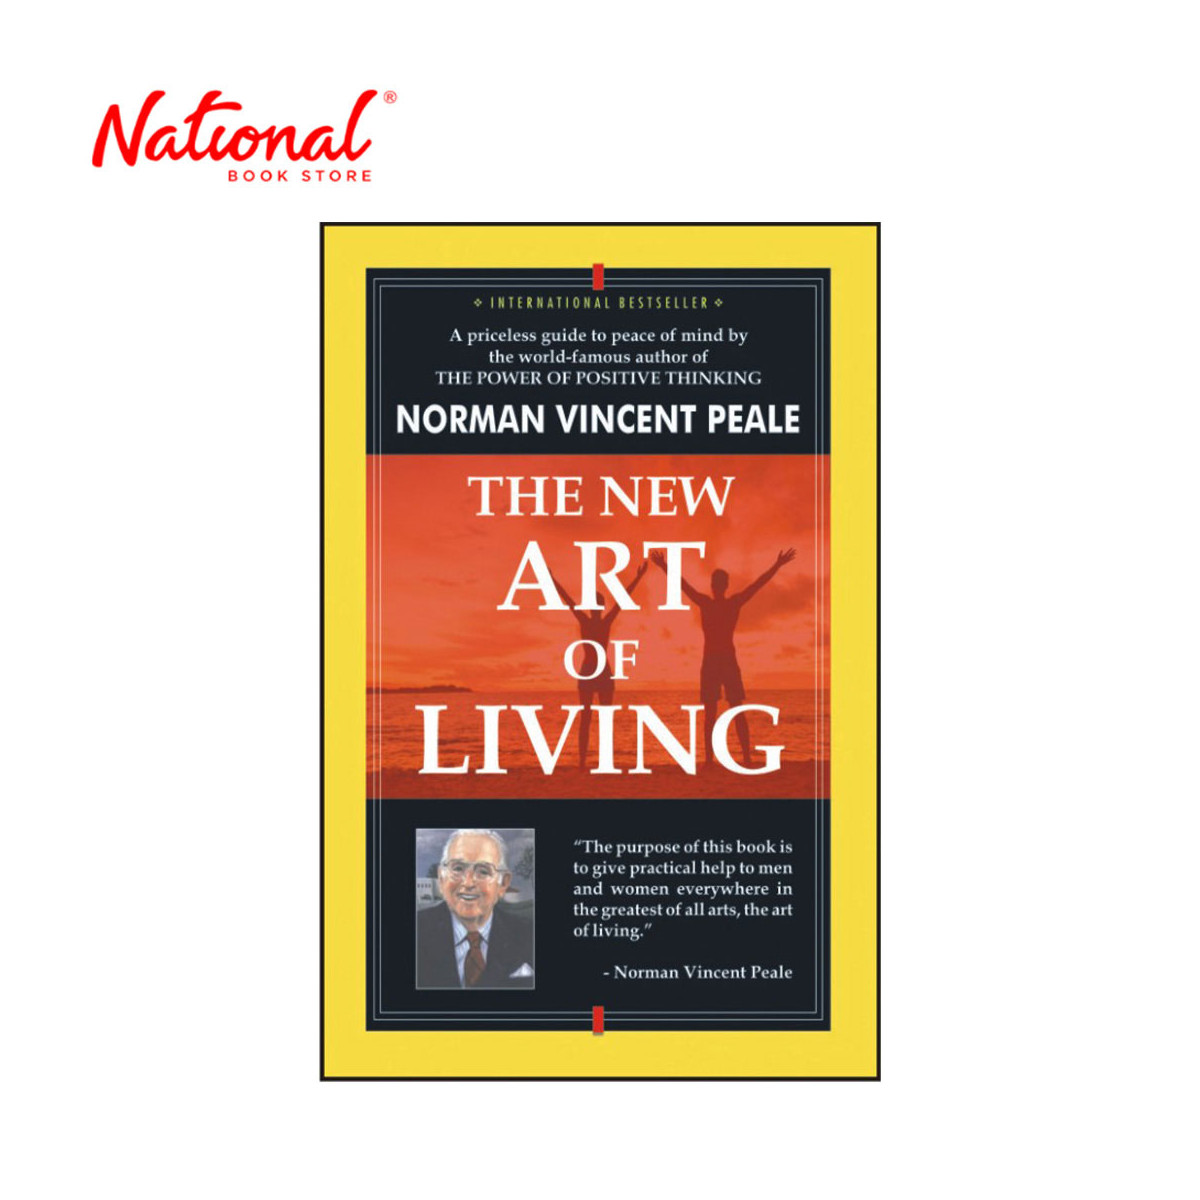 The New Art of Living by Norman Vincent Peale - Trade Paperback - Lifestyle - Psychology & Self-Help